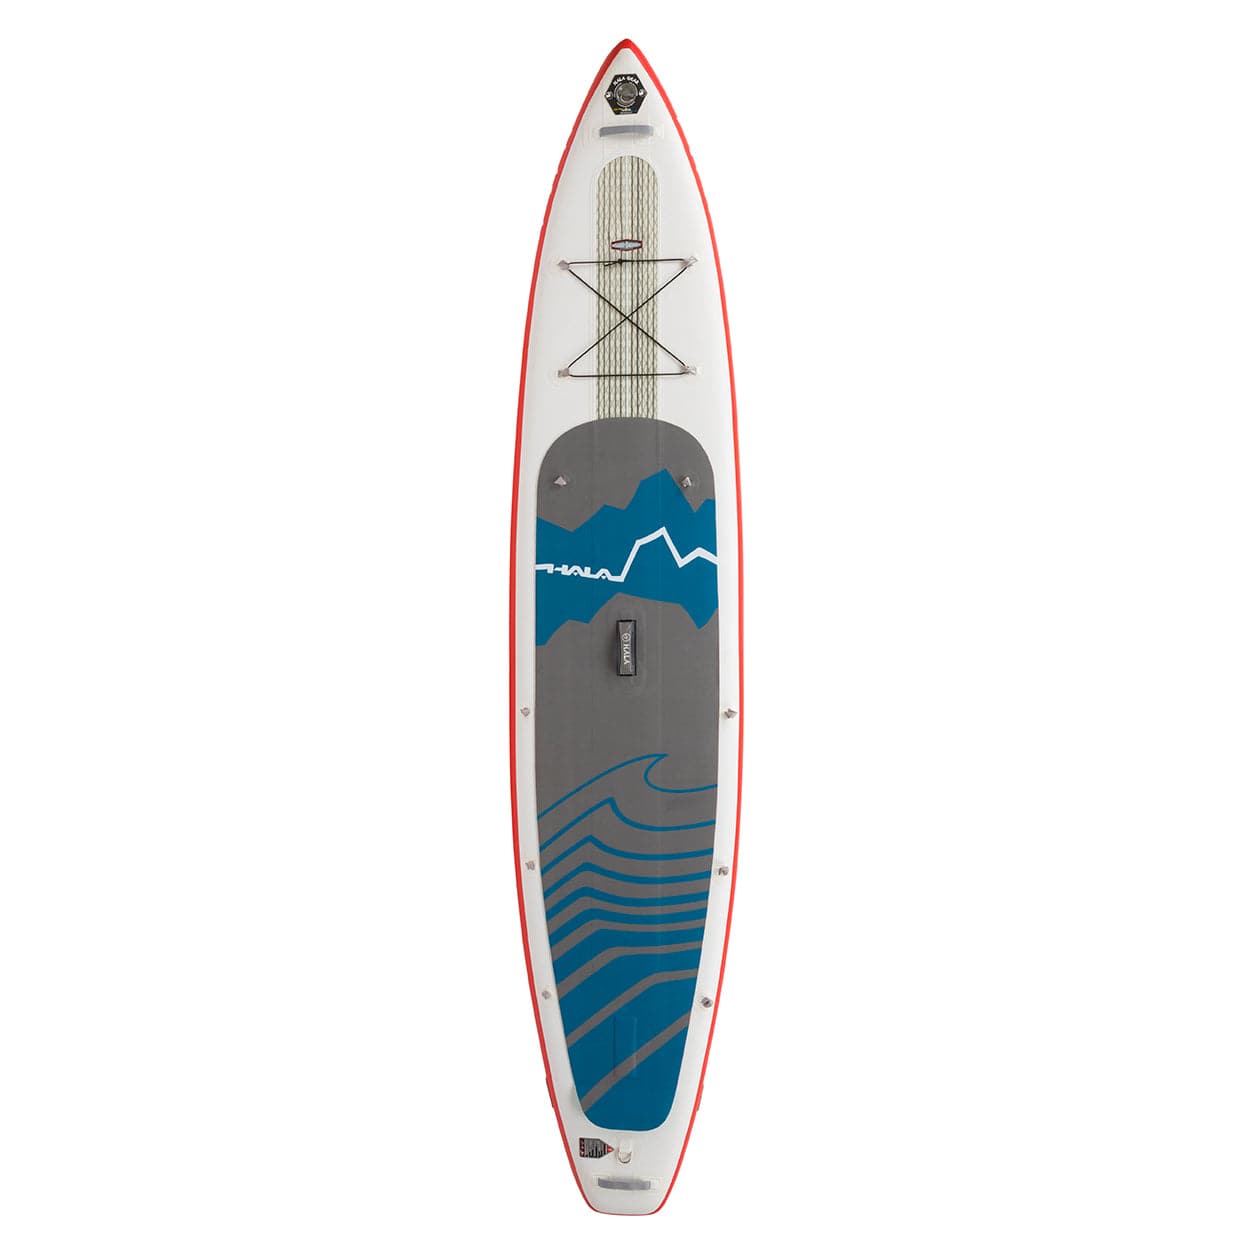 Featuring the Carbon Nass 12'6 Inflatable SUP inflatable sup manufactured by Hala shown here from one angle.